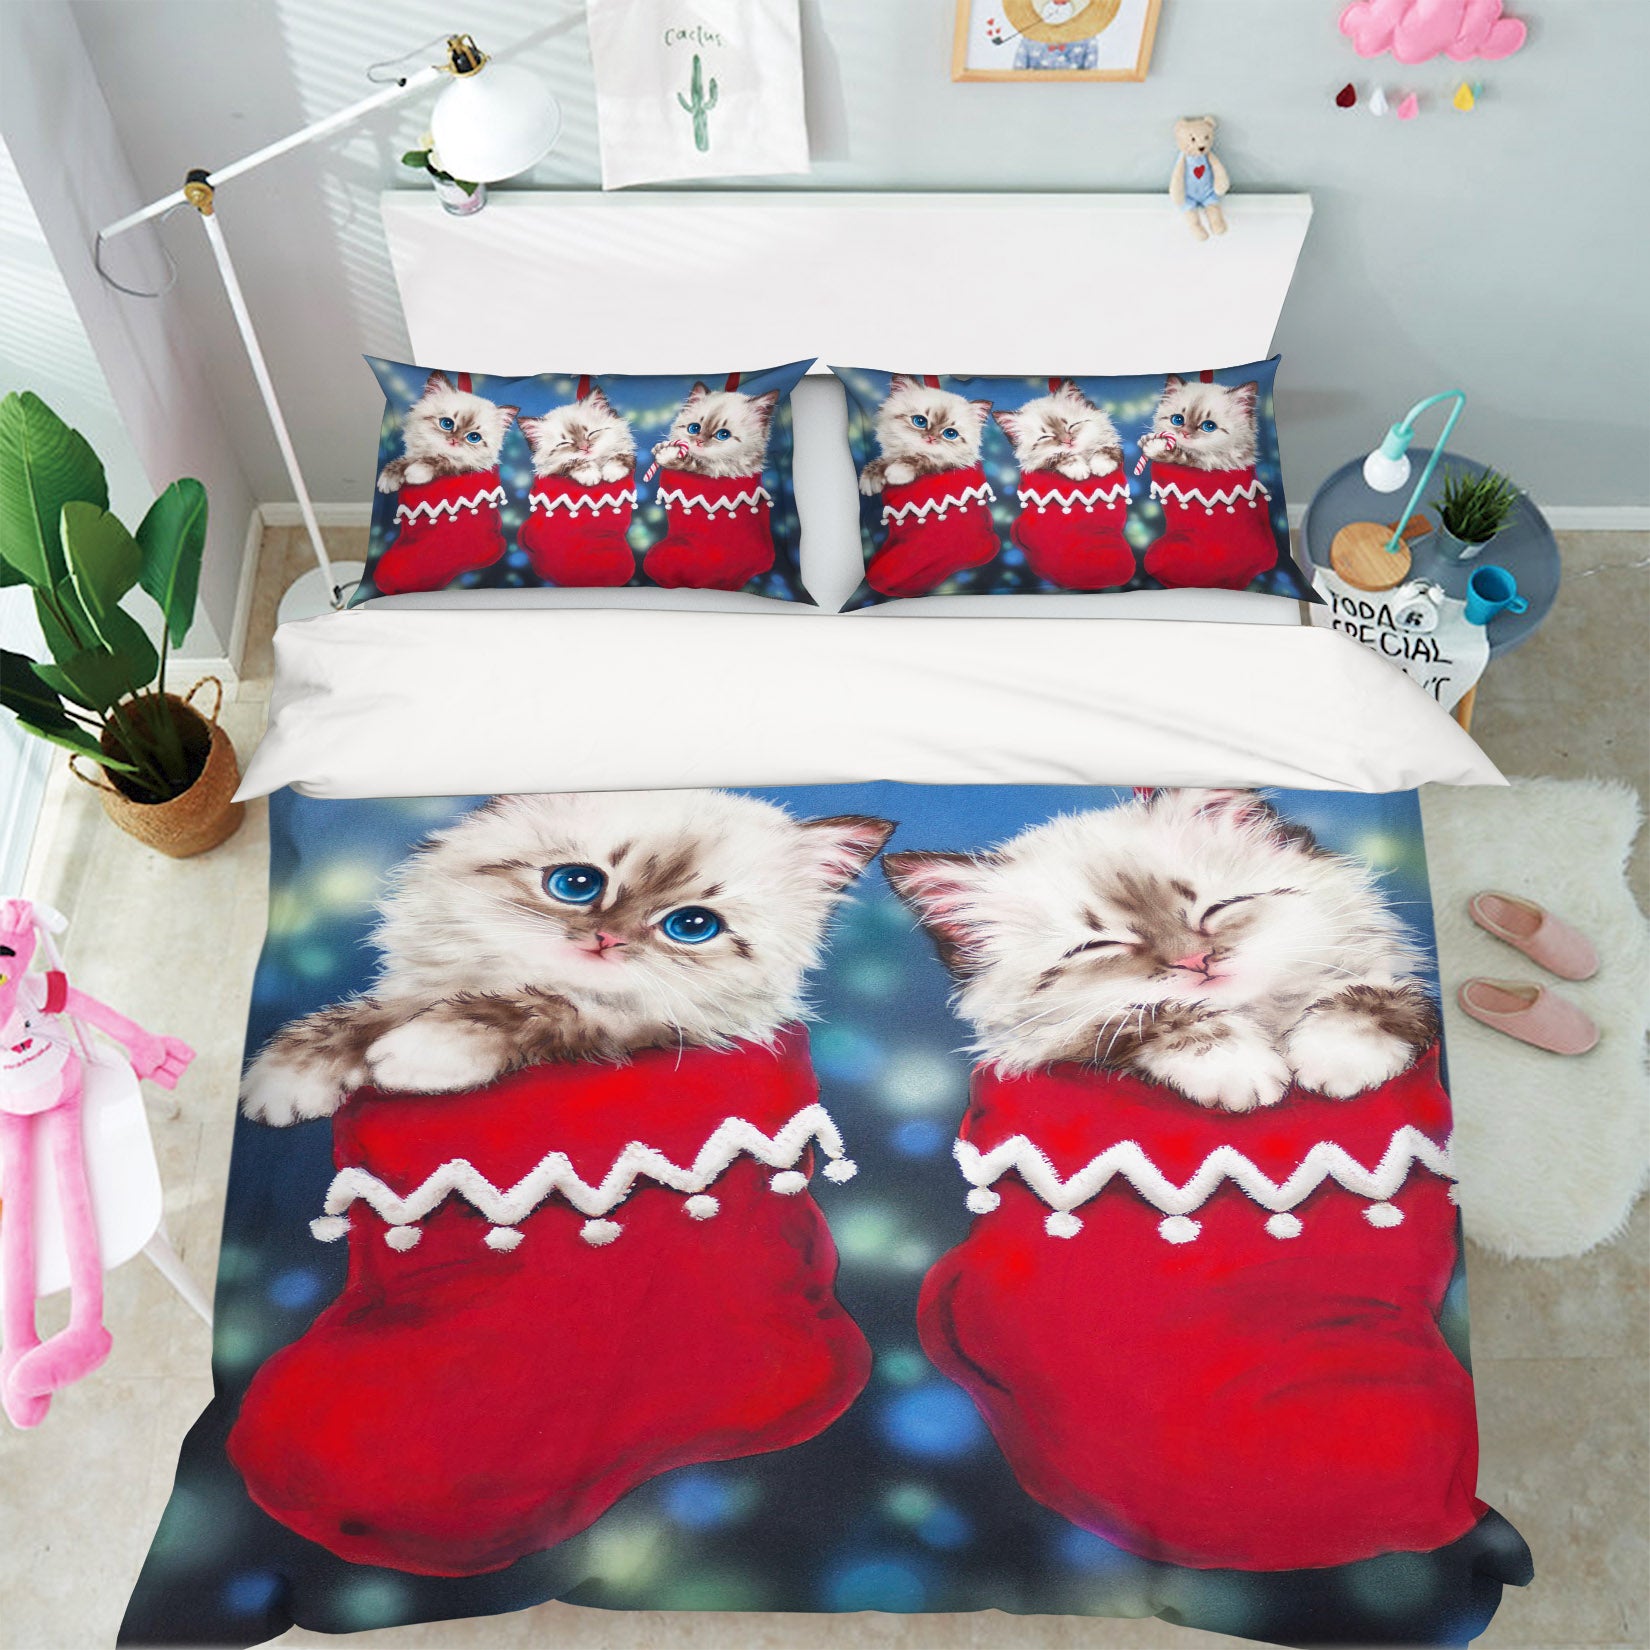 3D Red Shoe Cat 5920 Kayomi Harai Bedding Bed Pillowcases Quilt Cover Duvet Cover